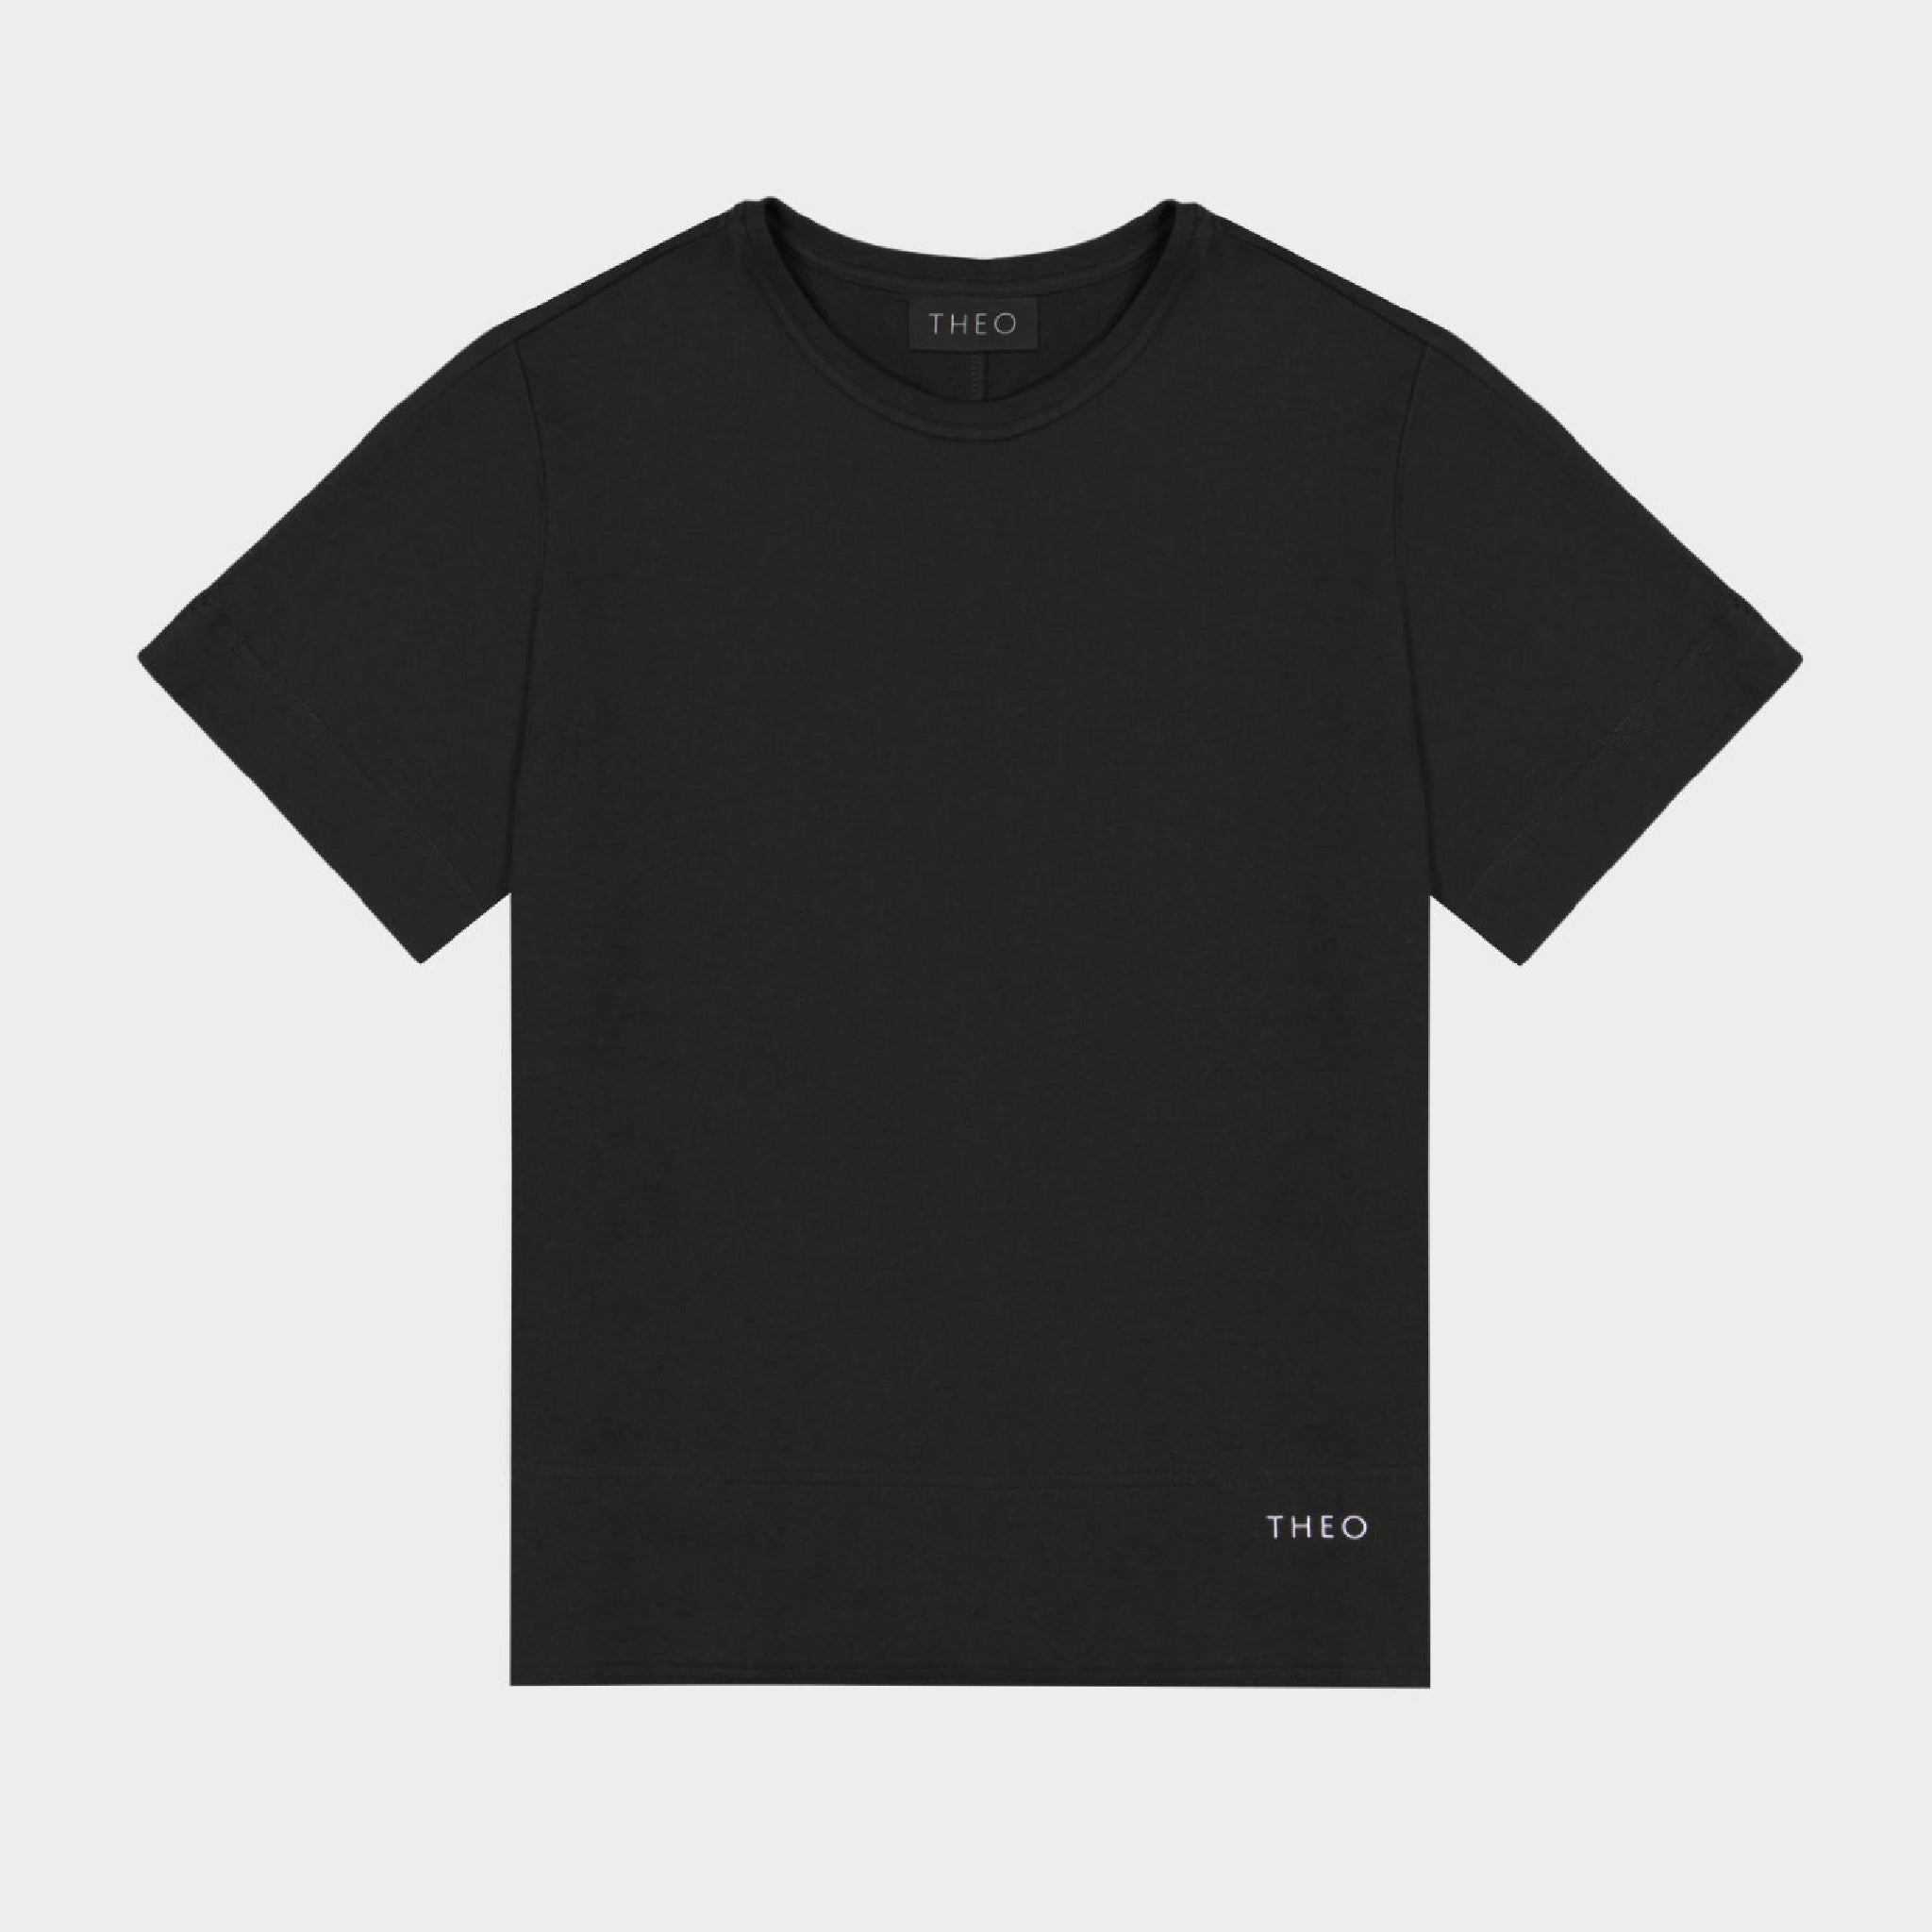 JERSEY T-SHIRT WITH THEO LOGO